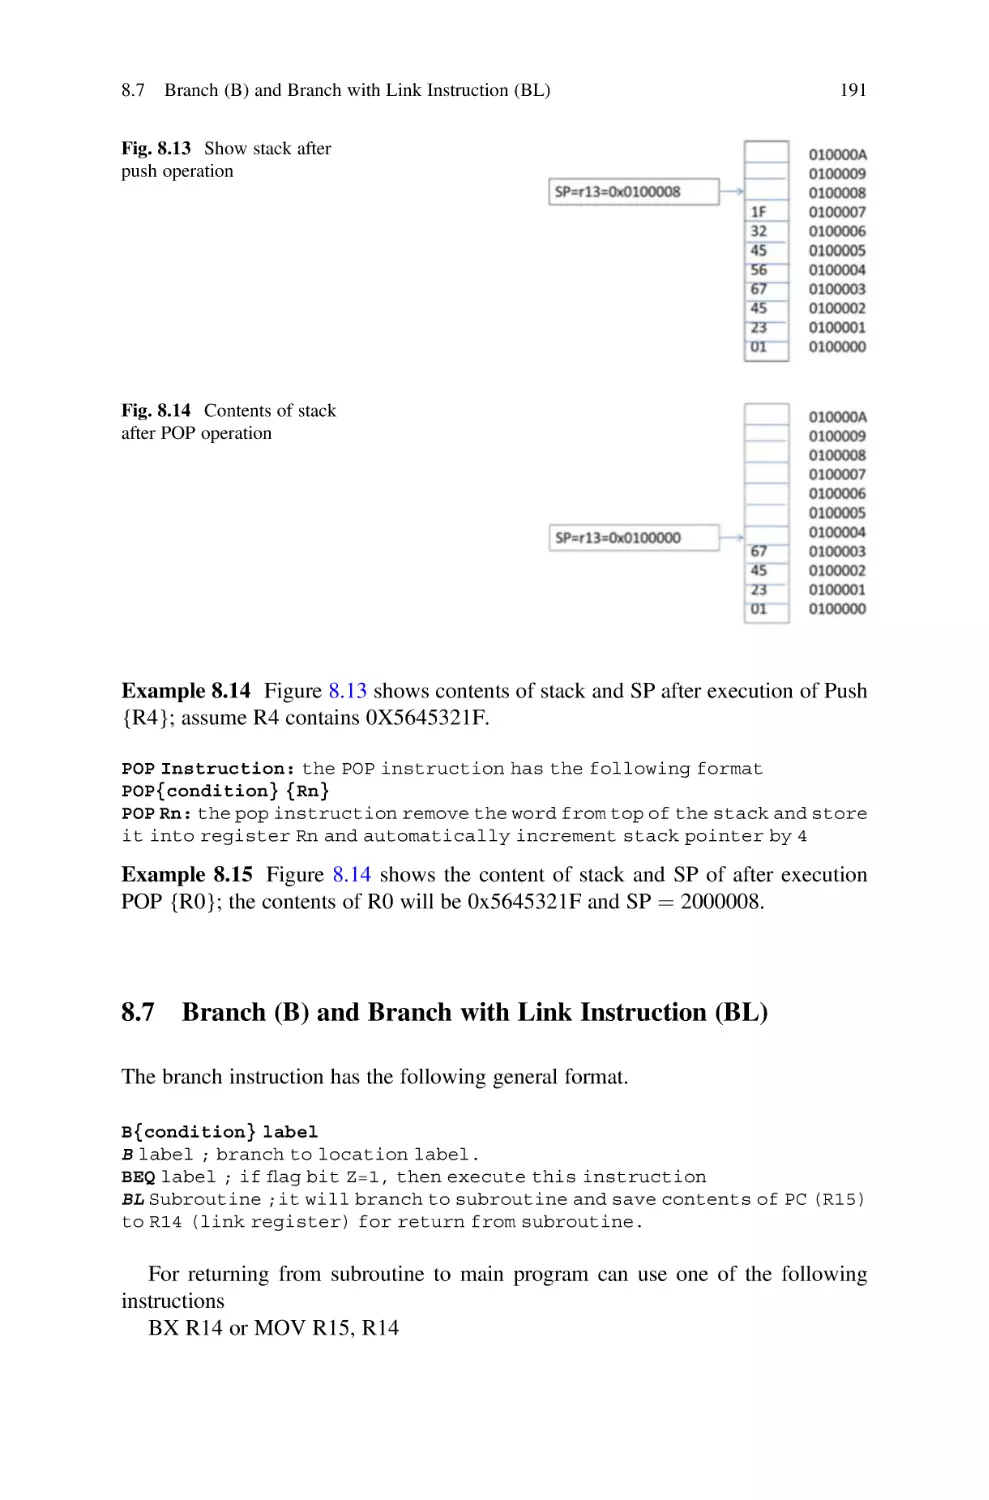 8.7 Branch (B) and Branch with Link Instruction (BL)